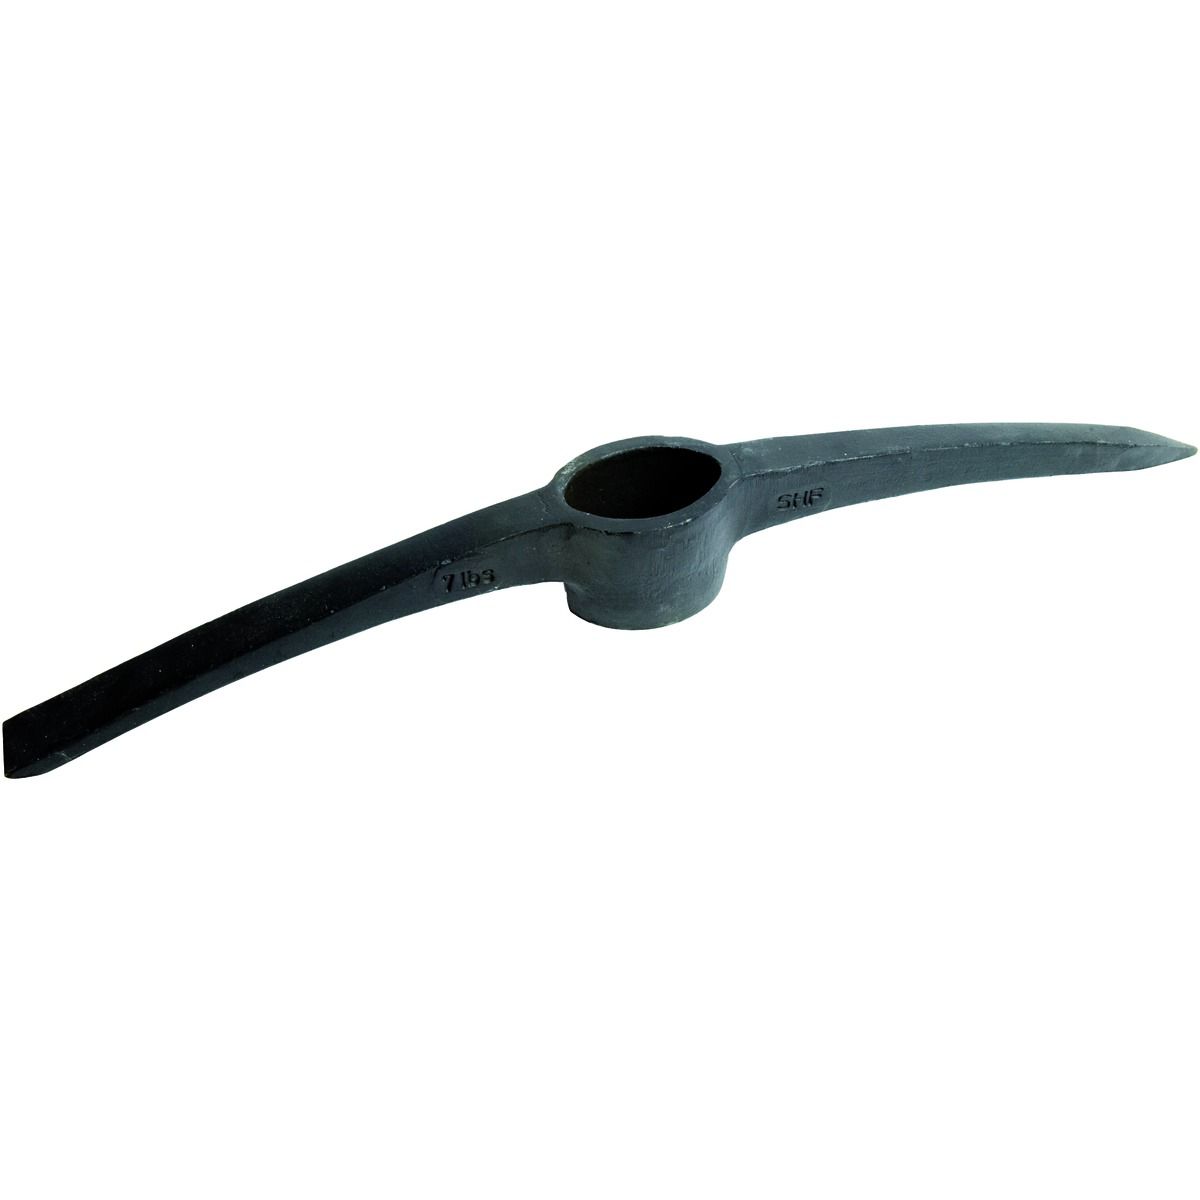 Image of Wickes Pick Axe - 3.2kg (7lb) Head Only